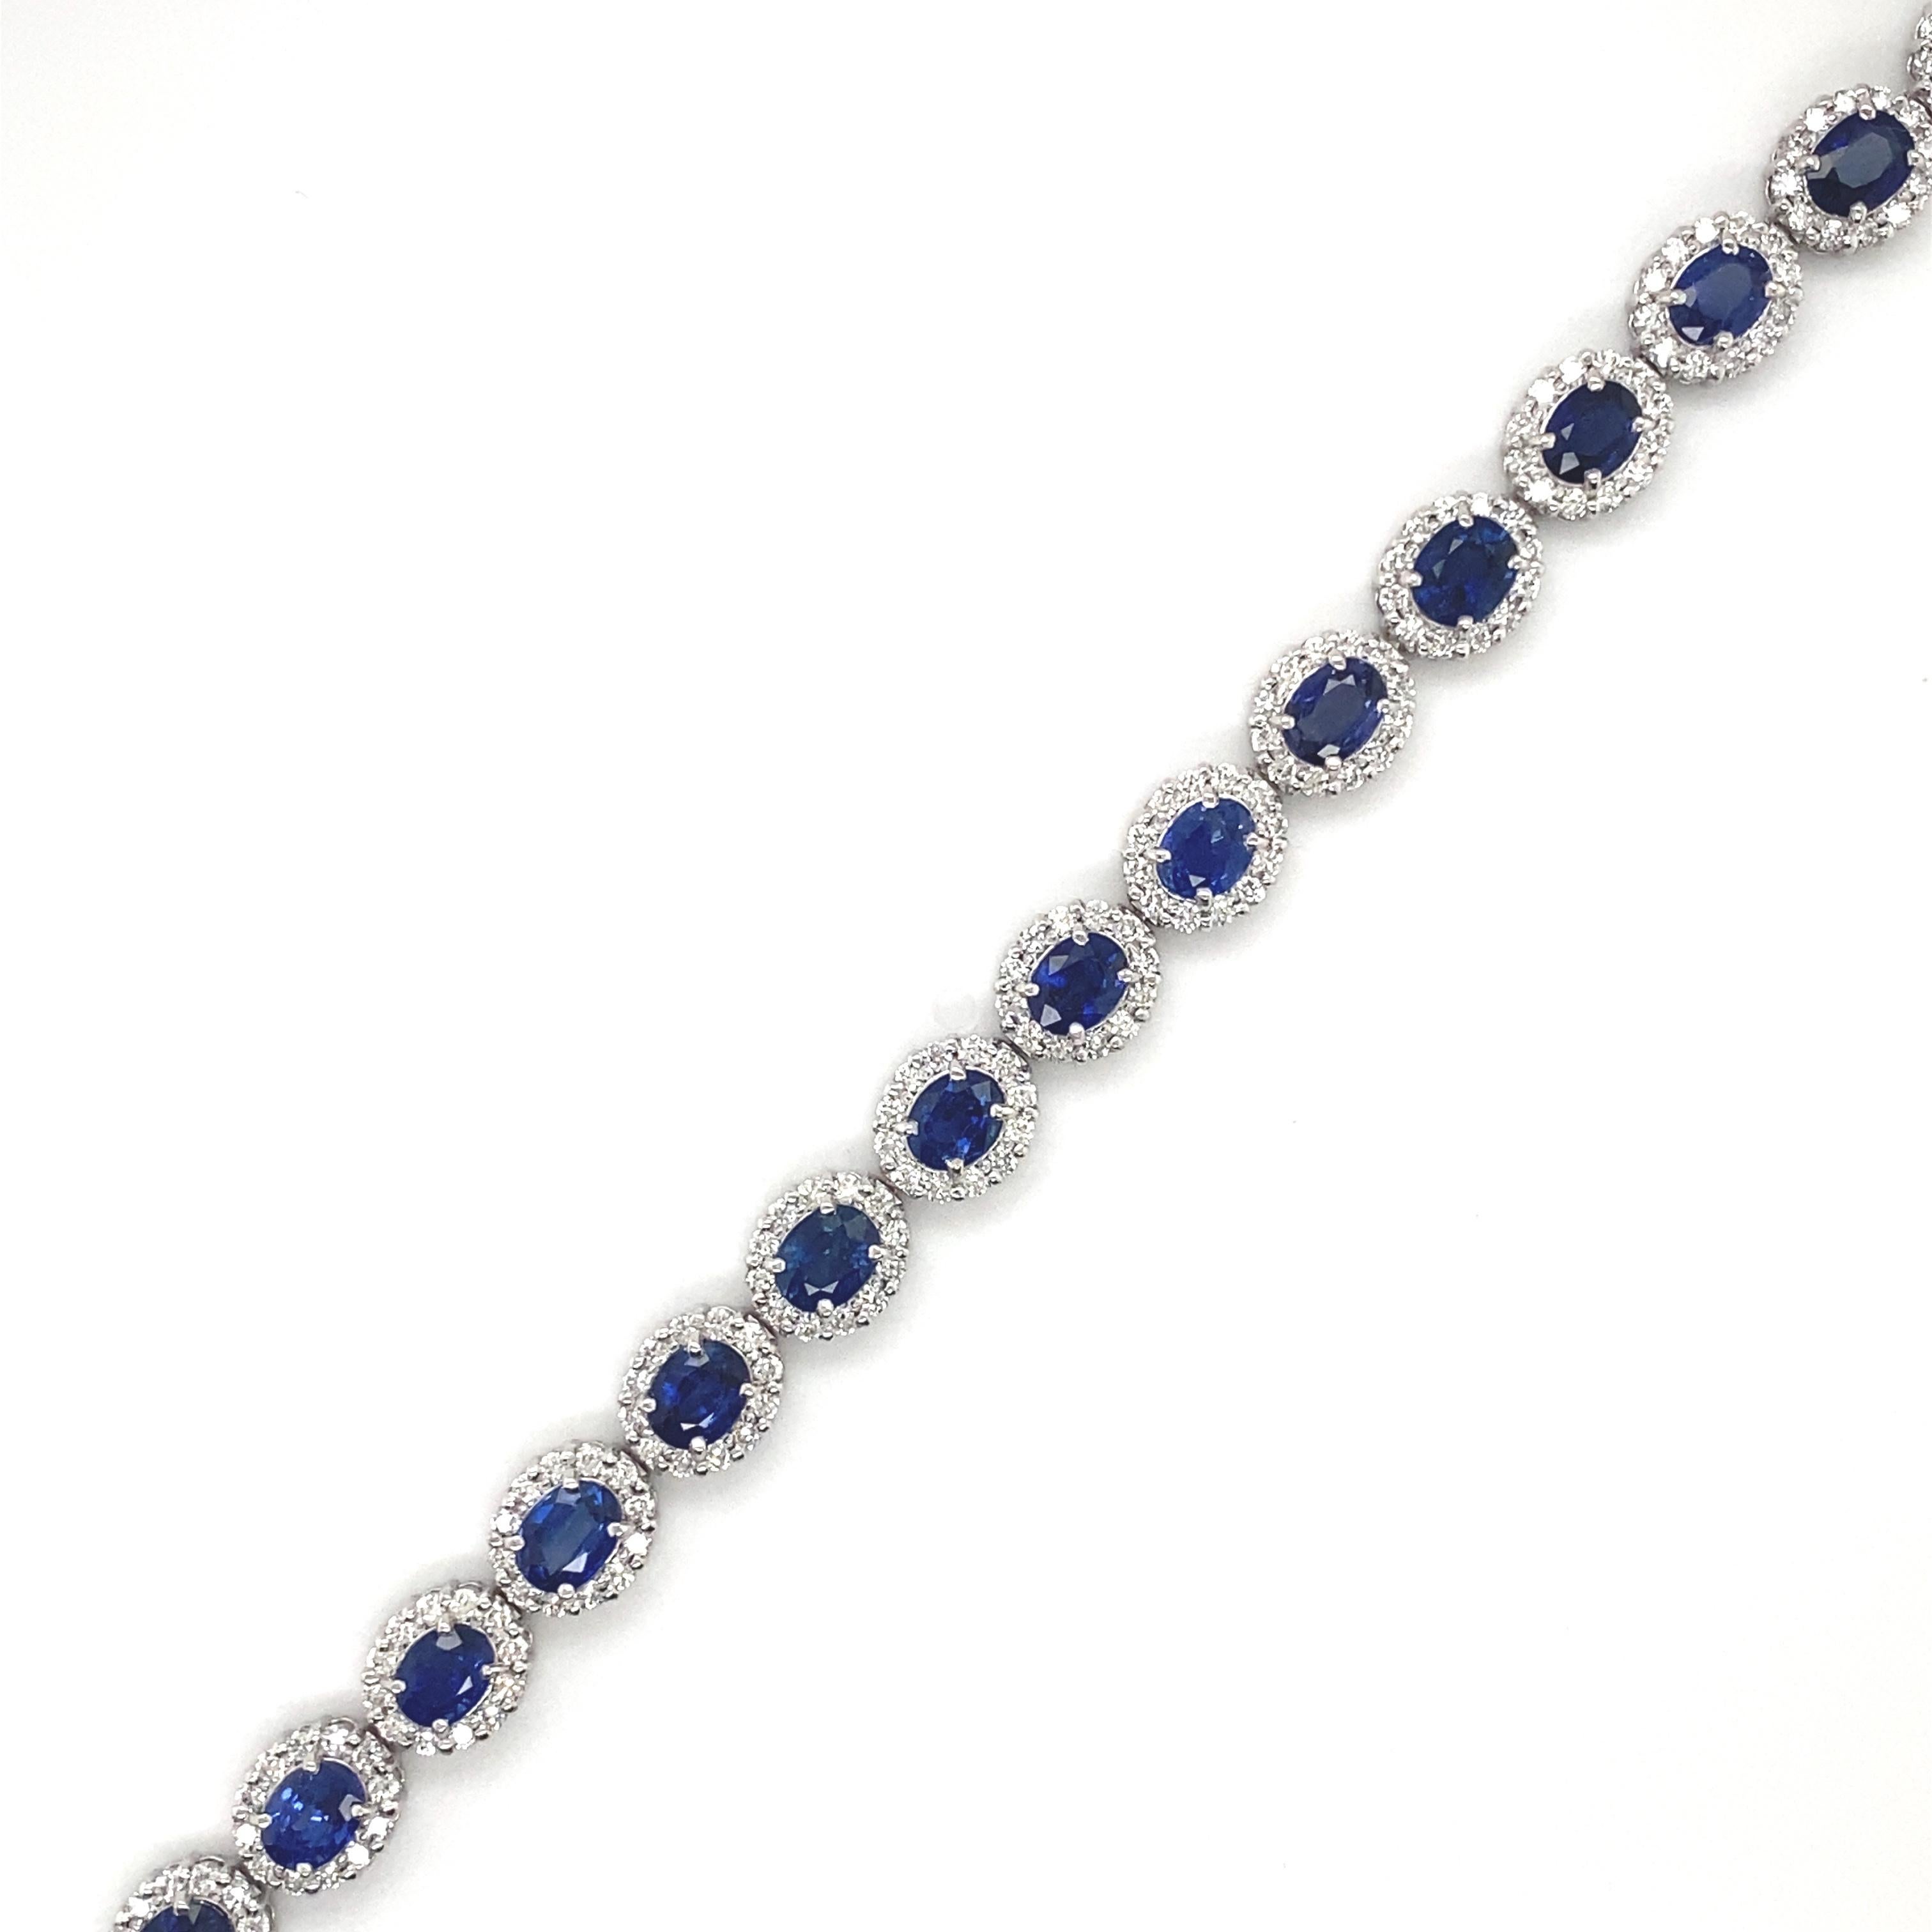 A beautiful Tennis Necklace Ring featuring a total of 9.77 Carats of Natural Sapphires and 2.53 Carats of Diamond Accents set in Platinum. The Sapphires are of 5x4 mm in size. Sapphires have extraordinary durability - they excel in hardness as well